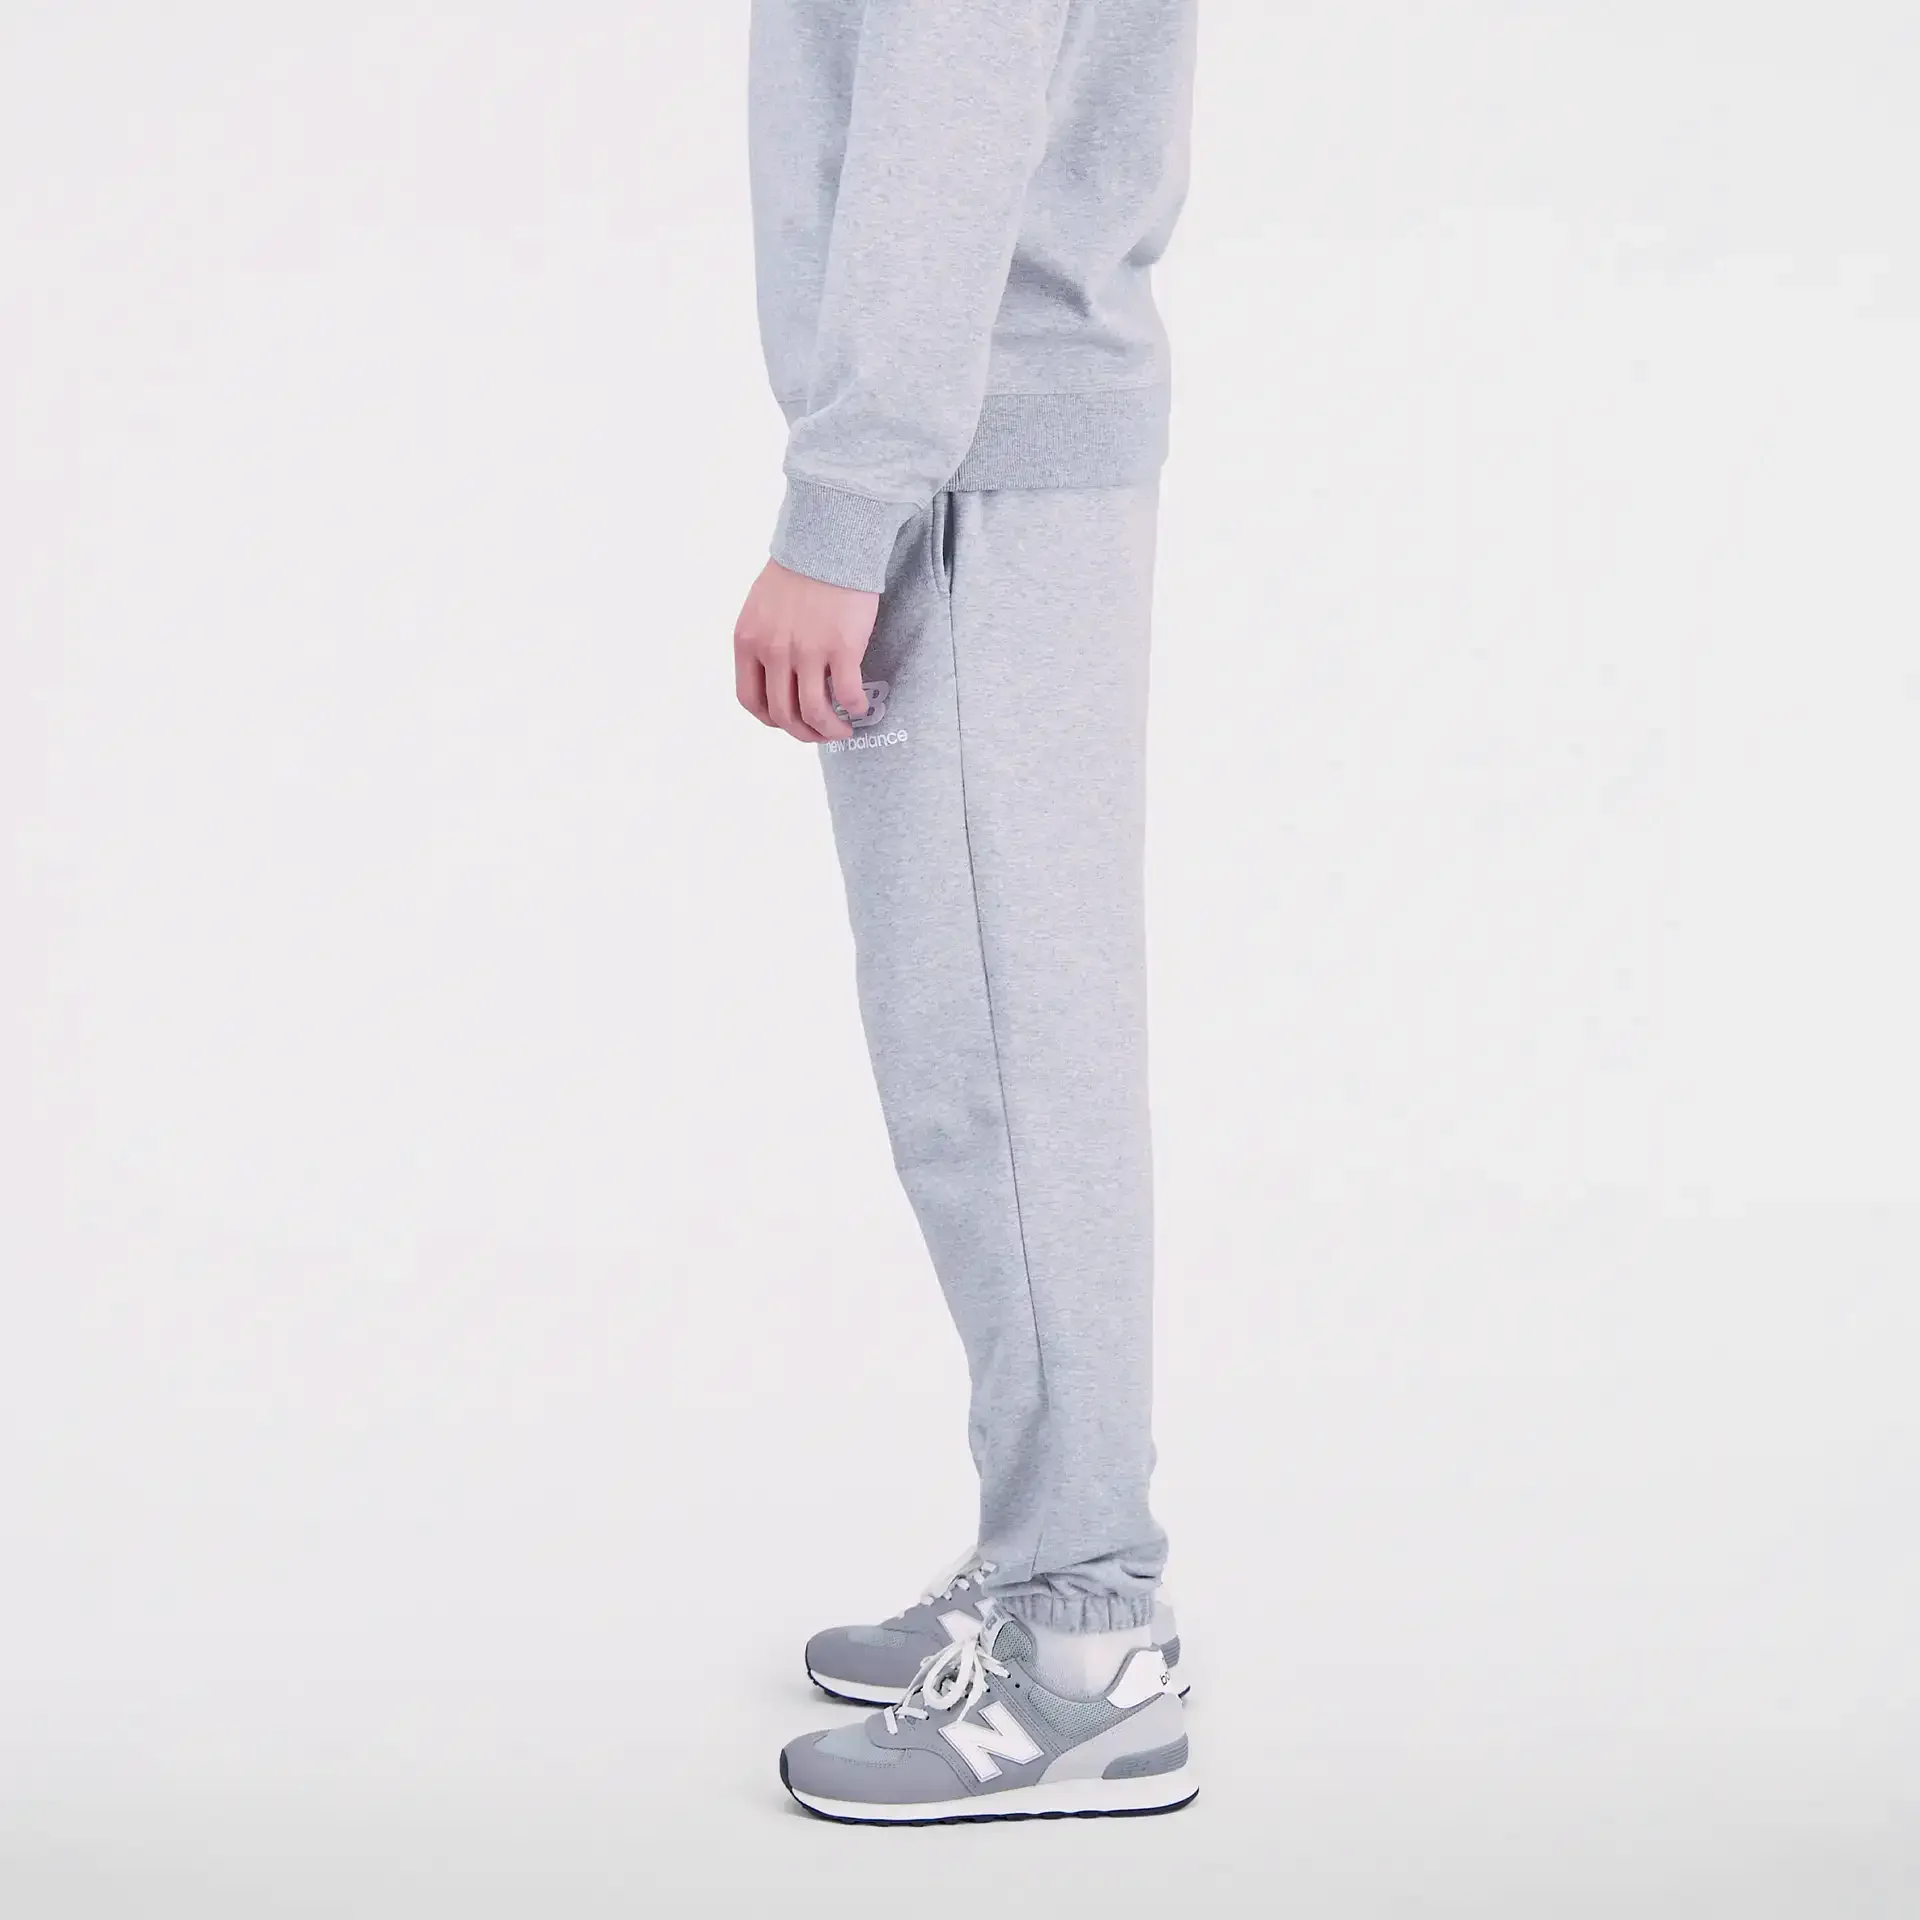 New Balance Essentials Stacked Logo French Terry Sweatpant Athletic Grey